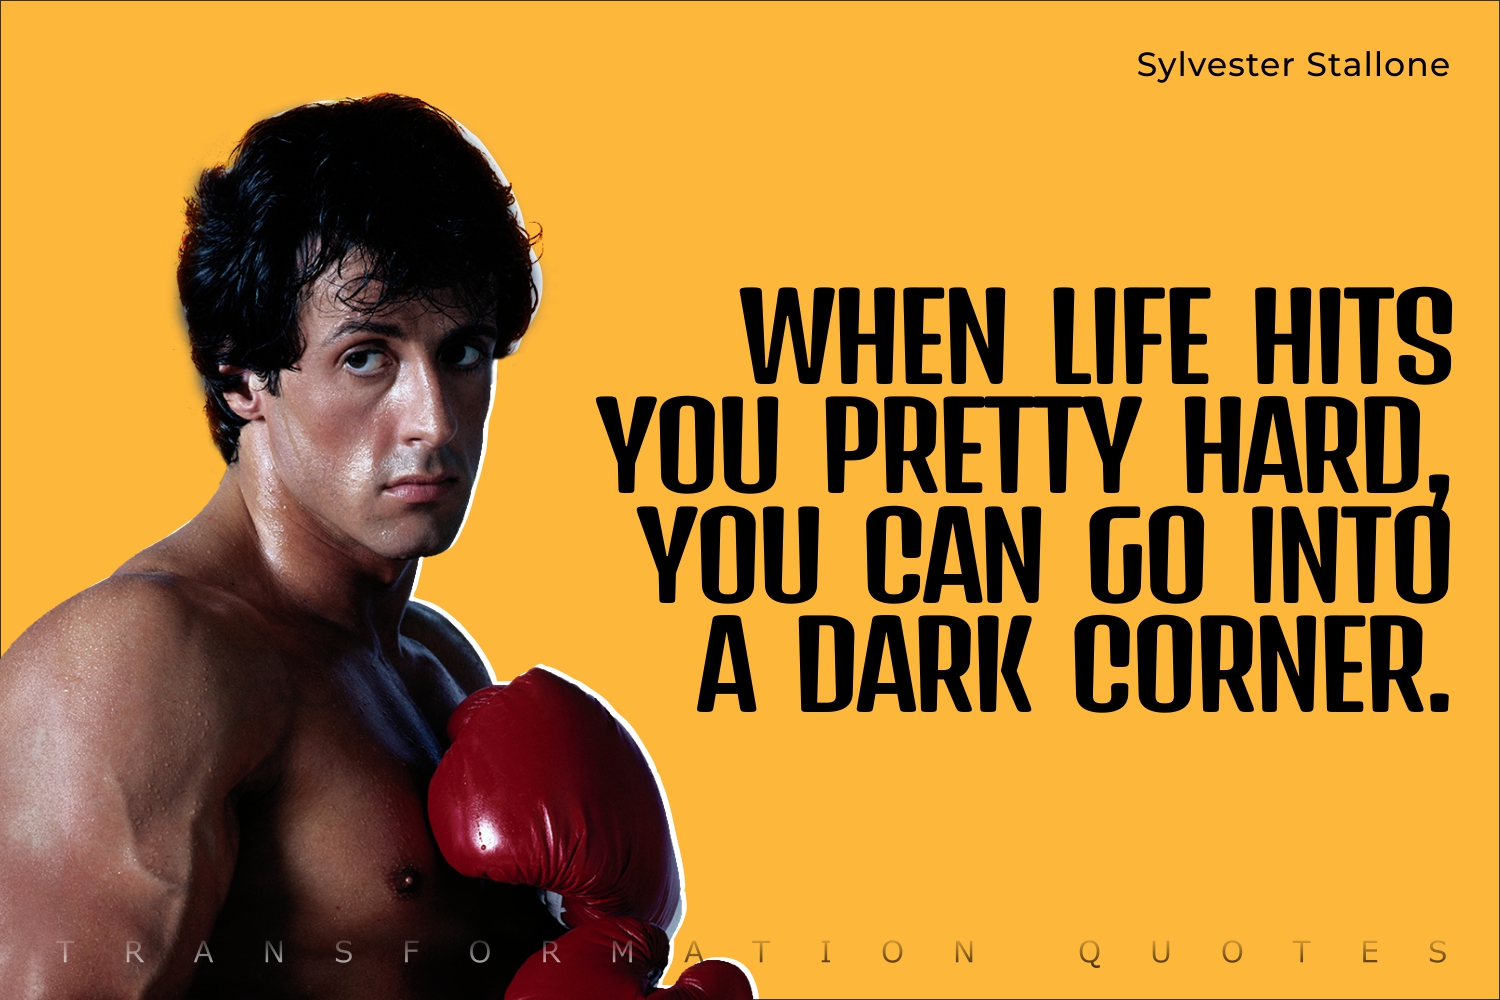 10 Sylvester Stallone Quotes That Will Inspire You | TransformationQuotes